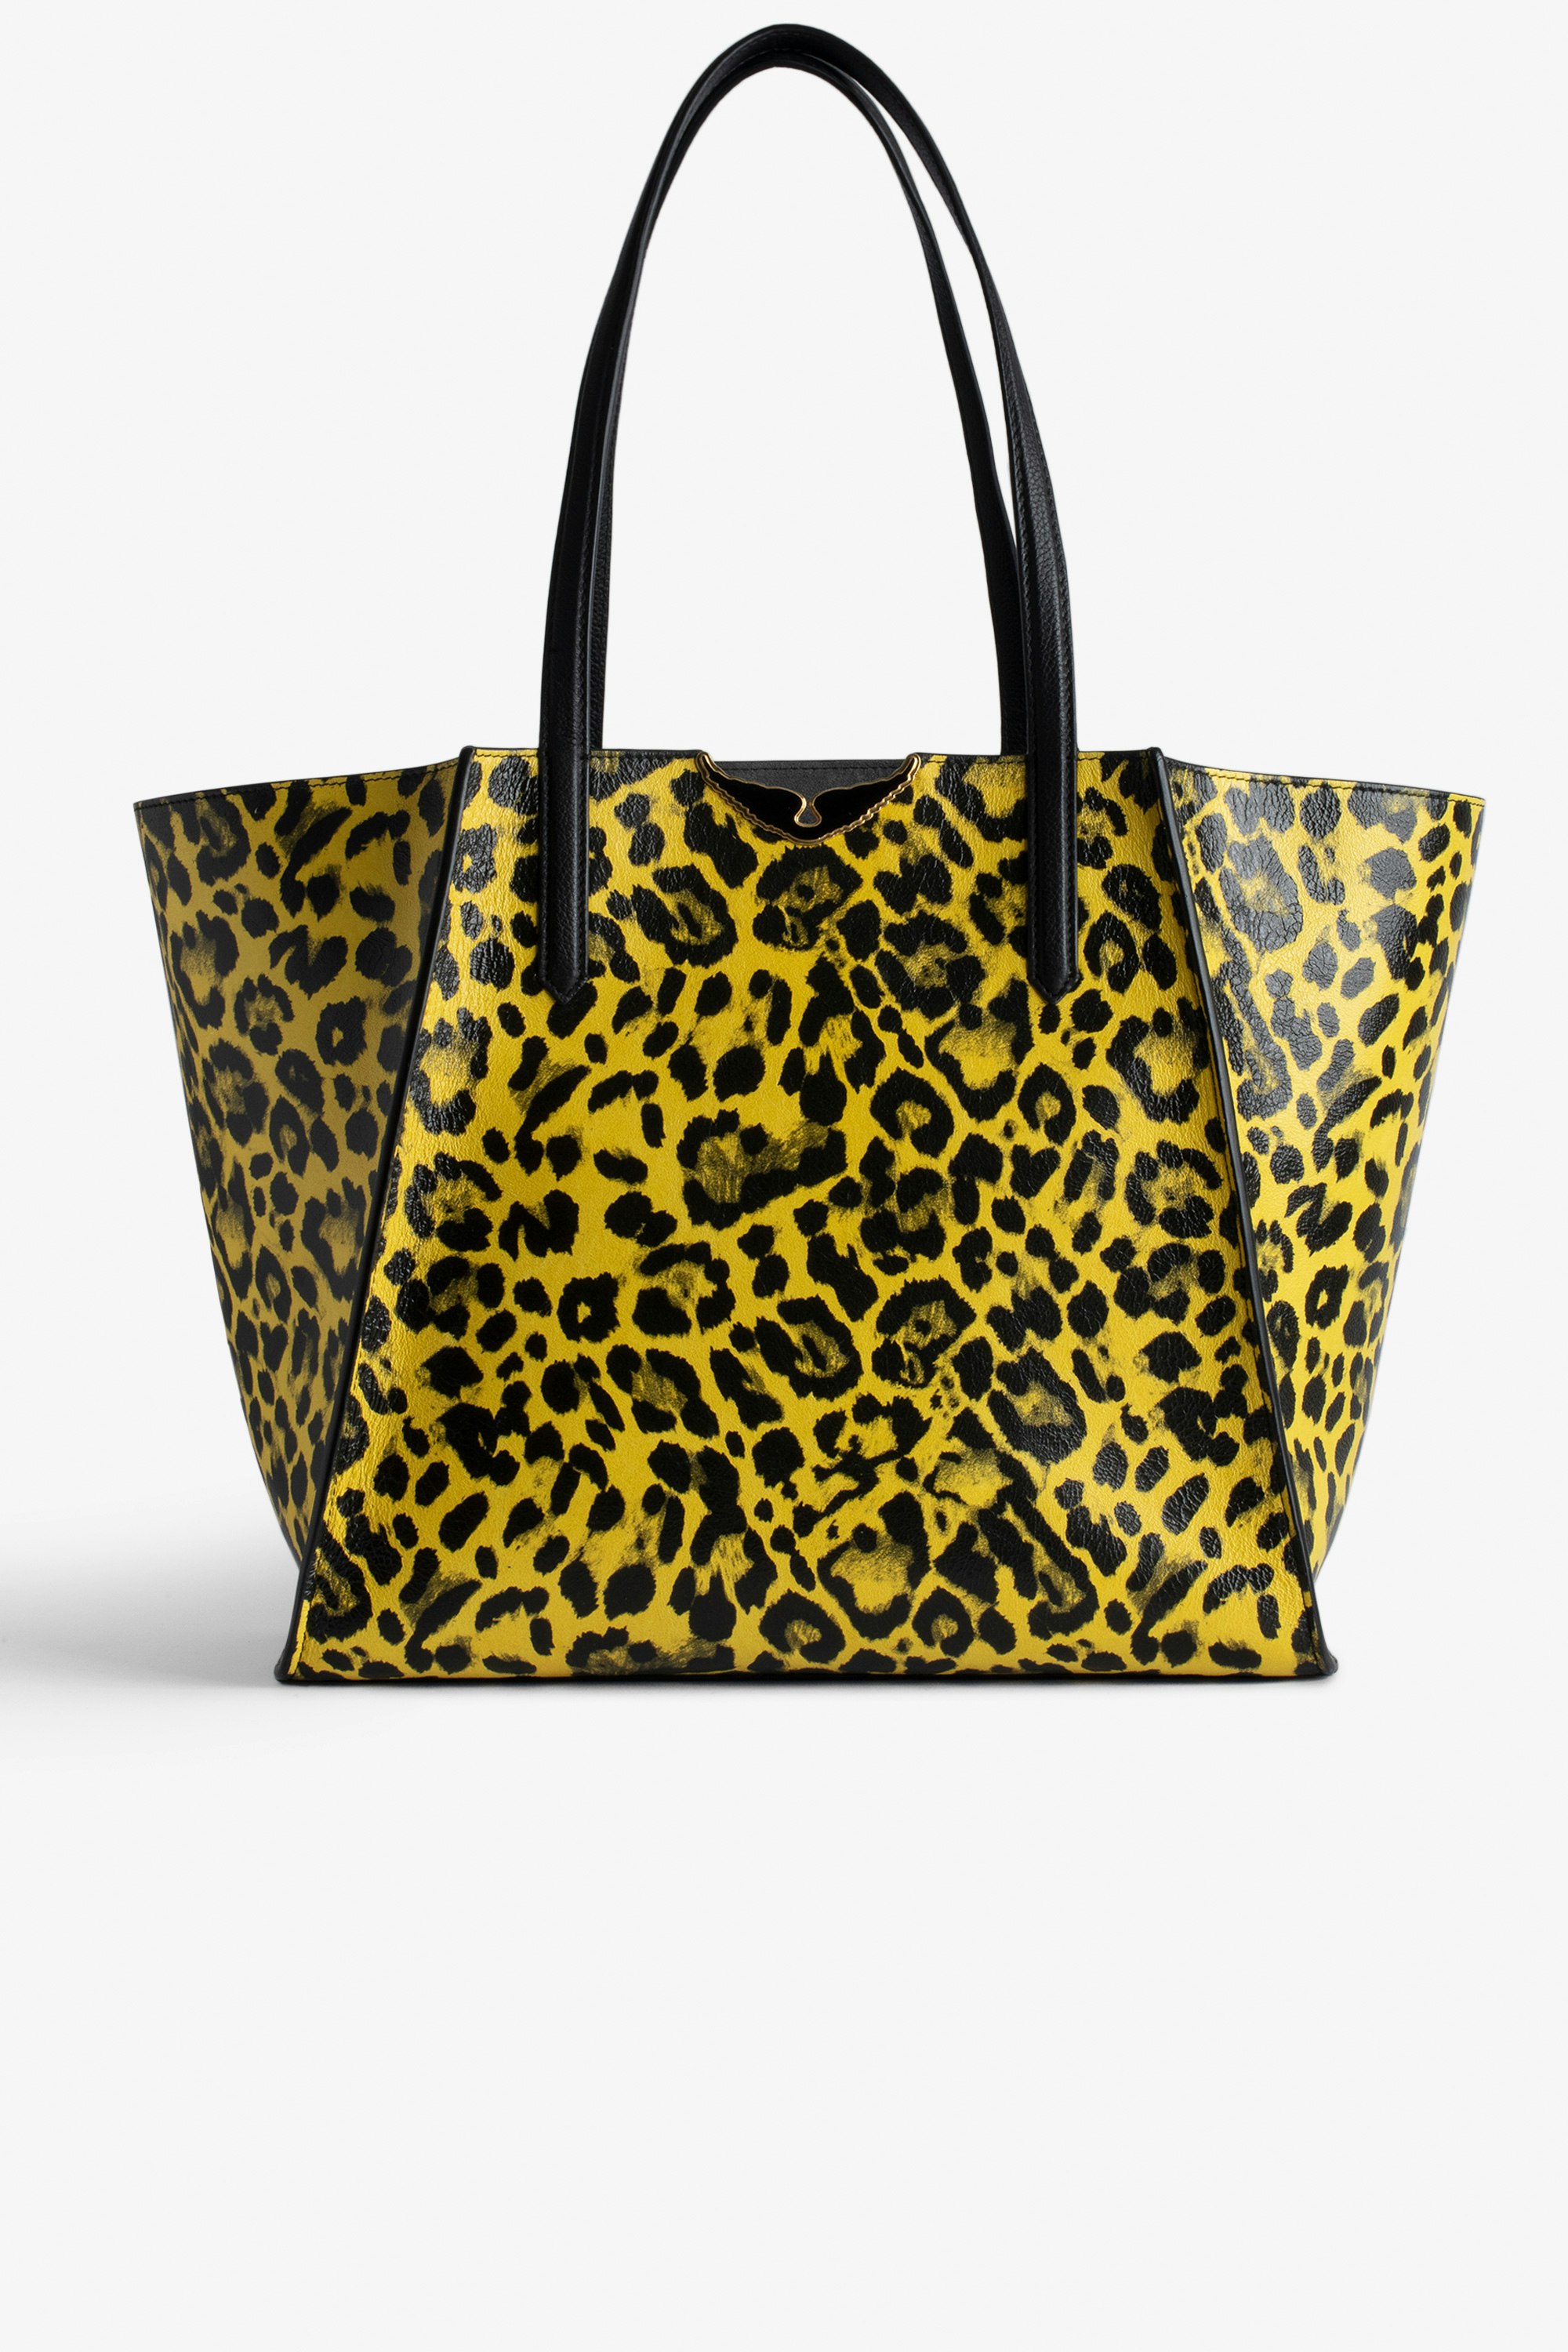 Le Borderline Leopard Bag Women’s reversible tote bag in yellow leopard-print patent leather with handle and metal wings.